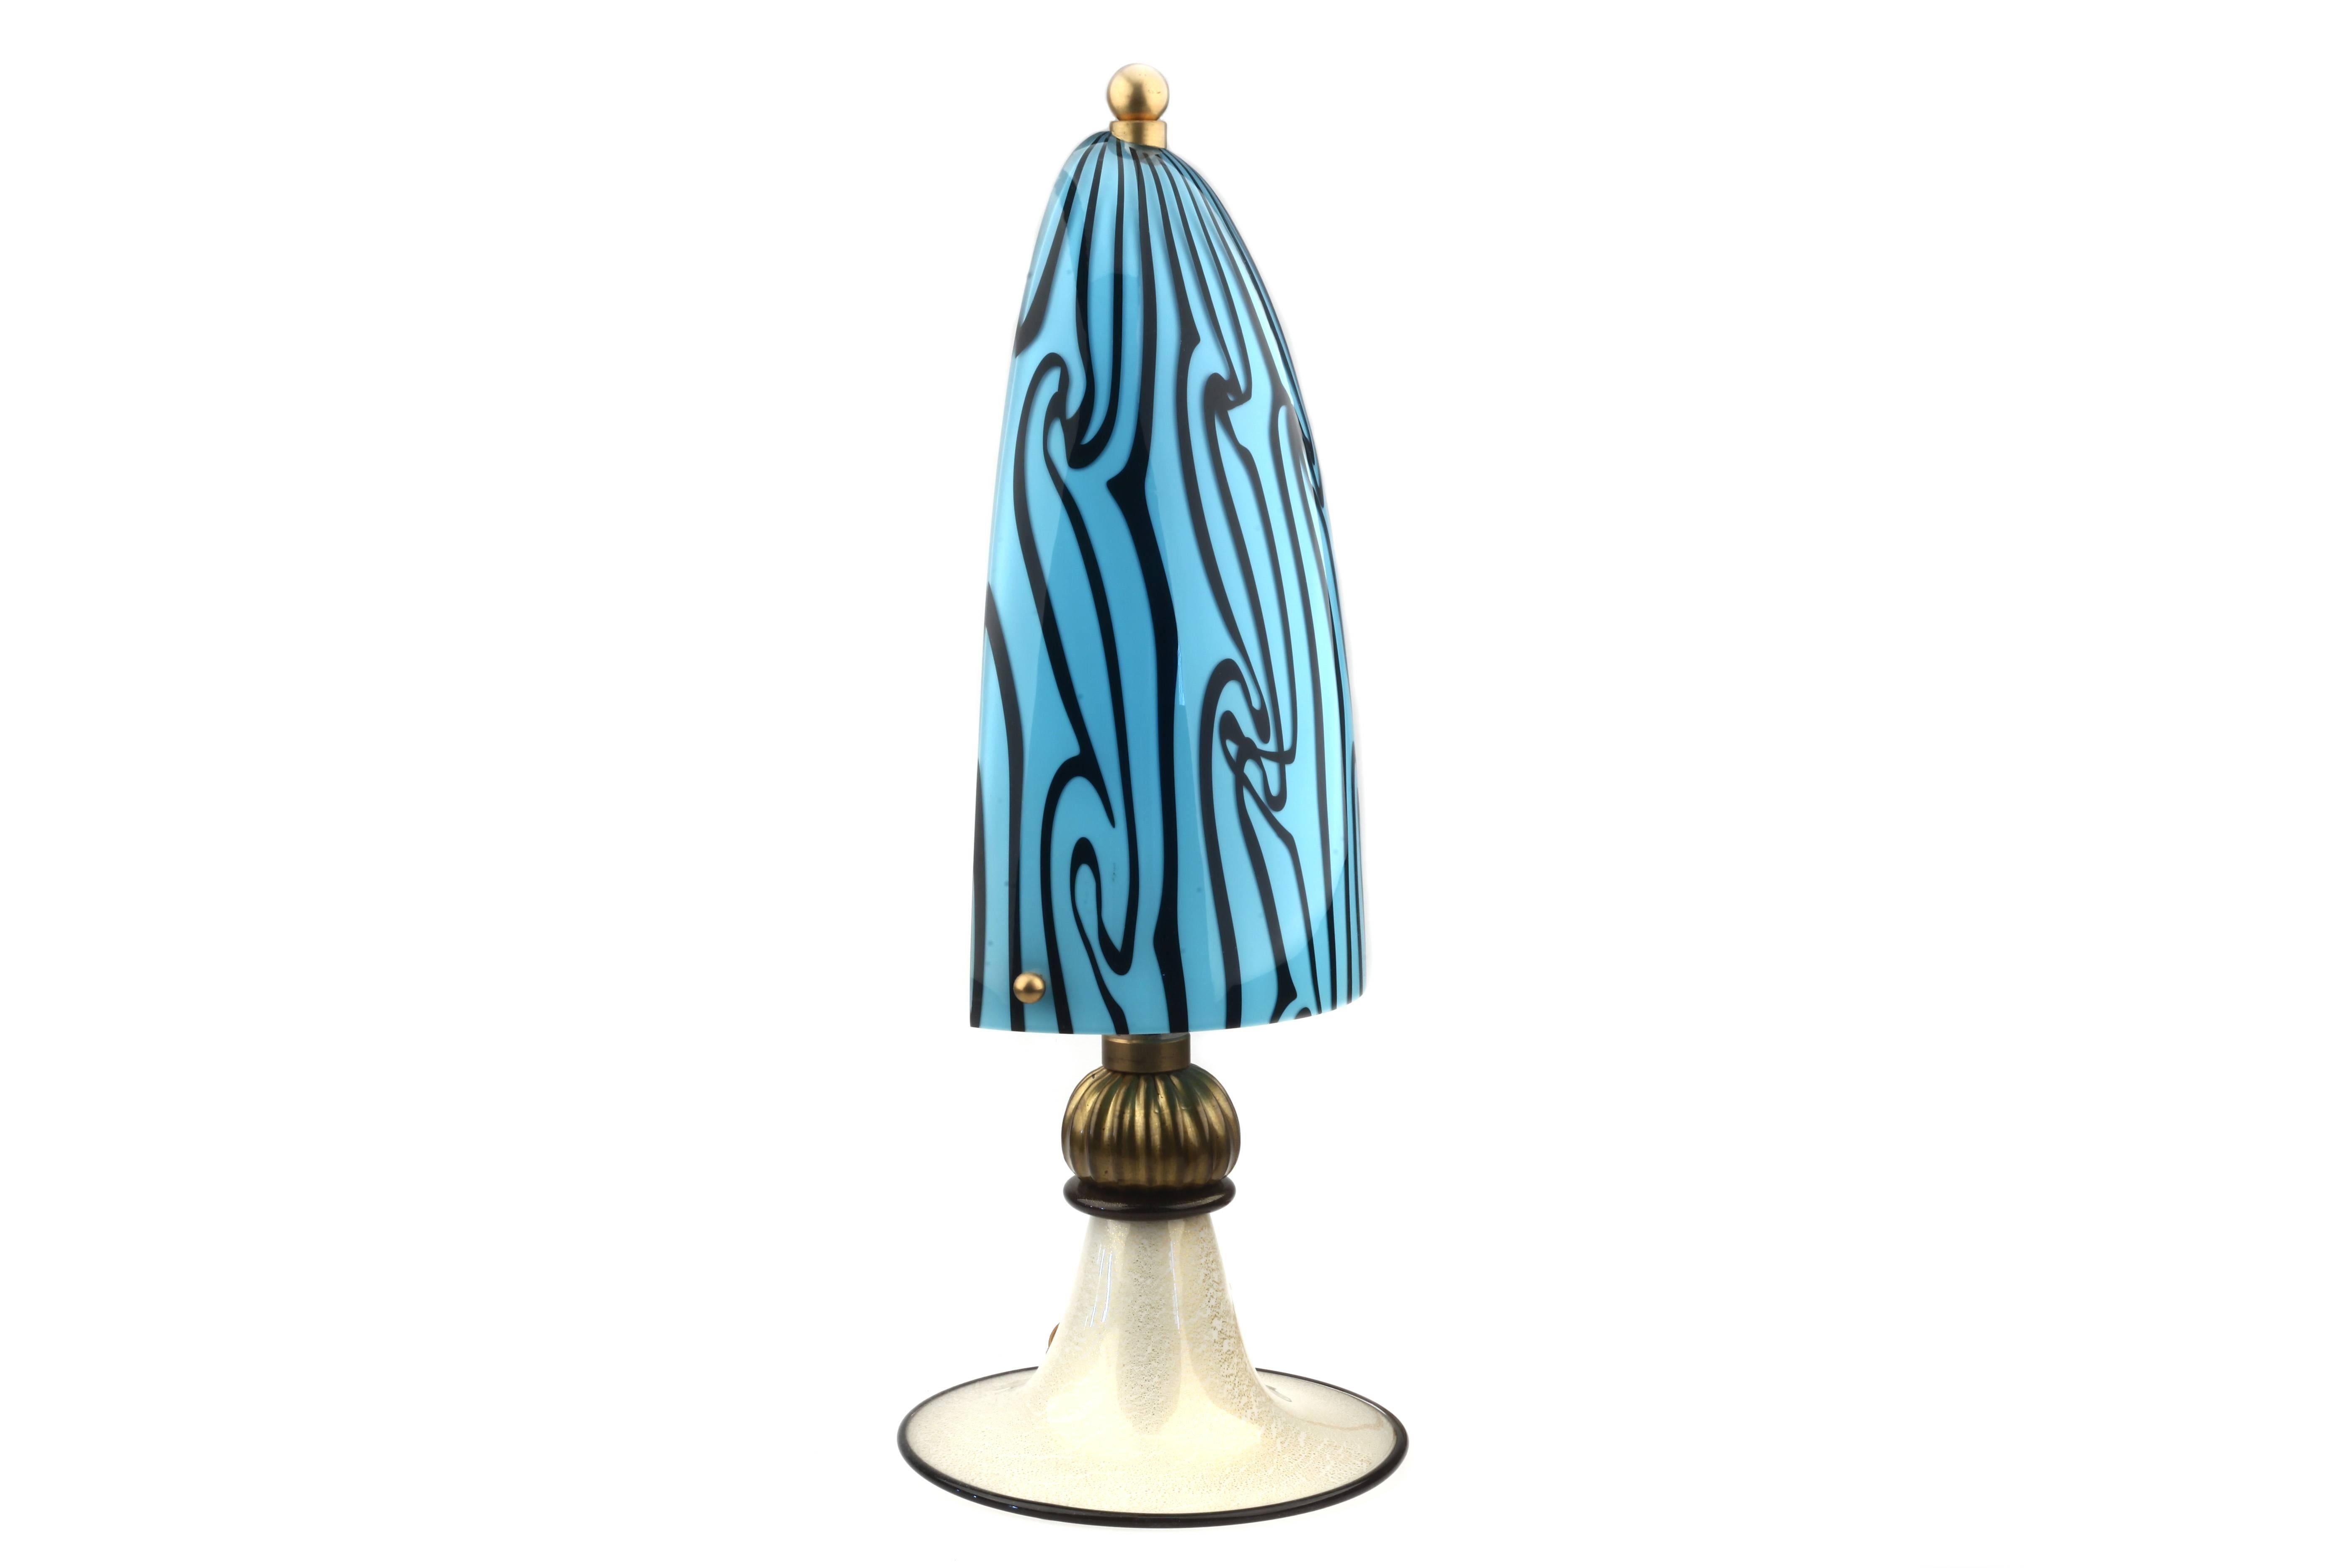 Murano Italy glass table lamp with gold foil base and brass frame.
It is in good condition.

Measures: Height 53 cm / 20.9,
diameter 20 cm / 7.9.